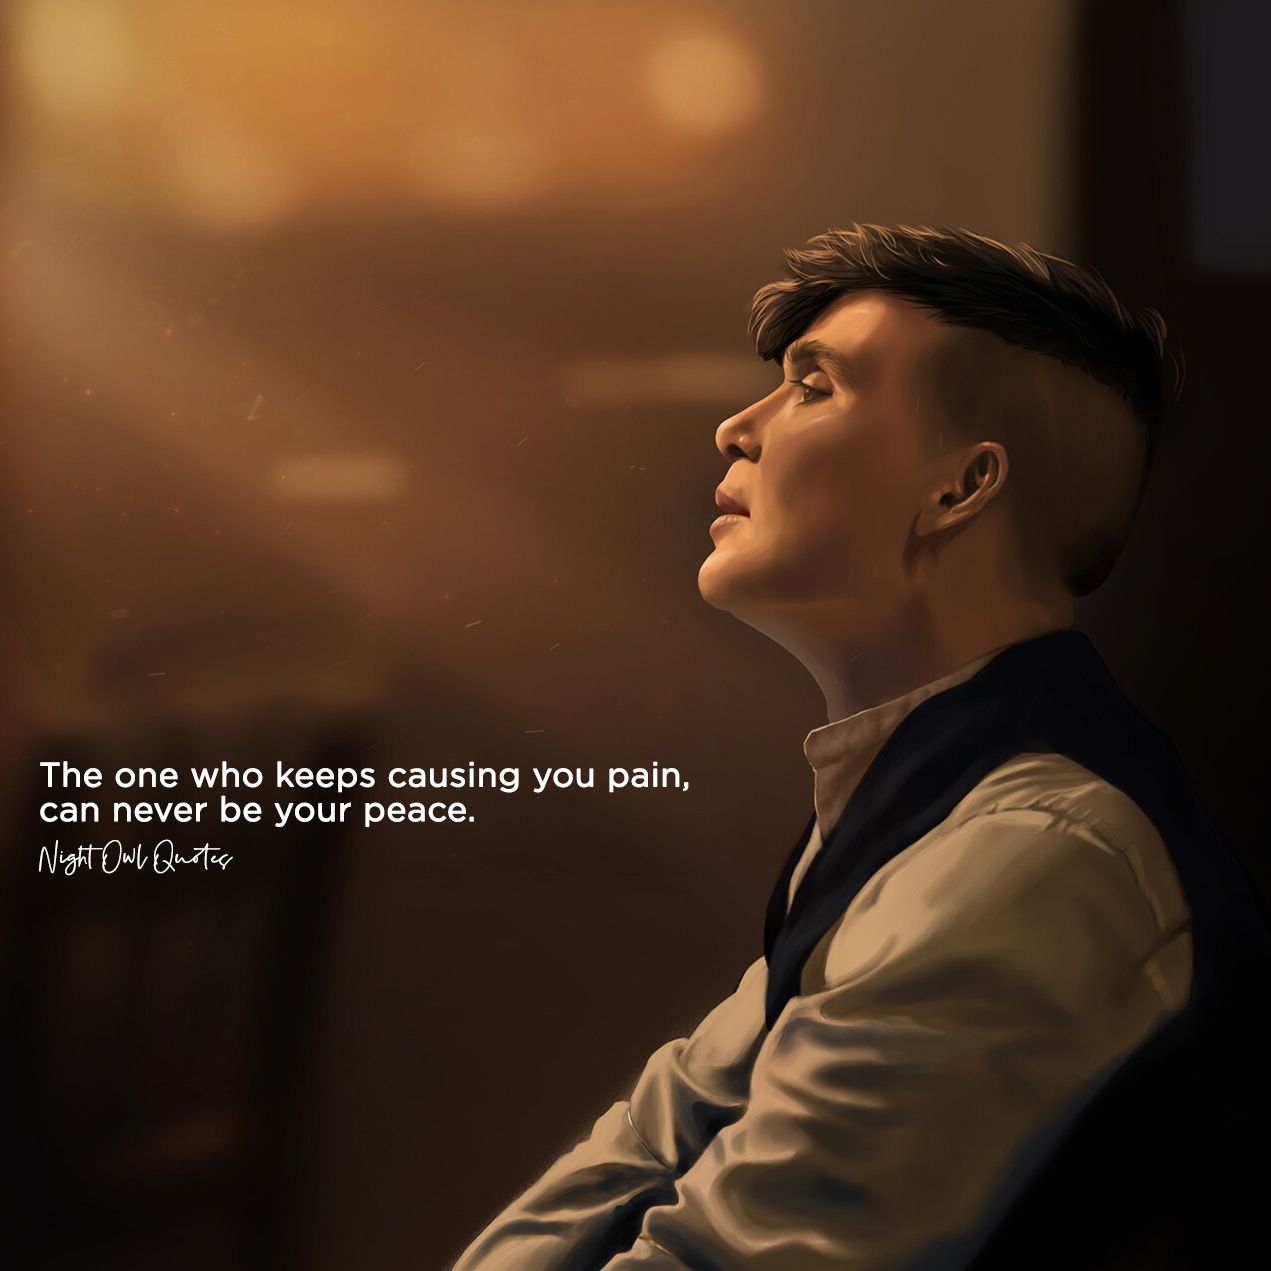 Thomas Shelby Quotes About Life